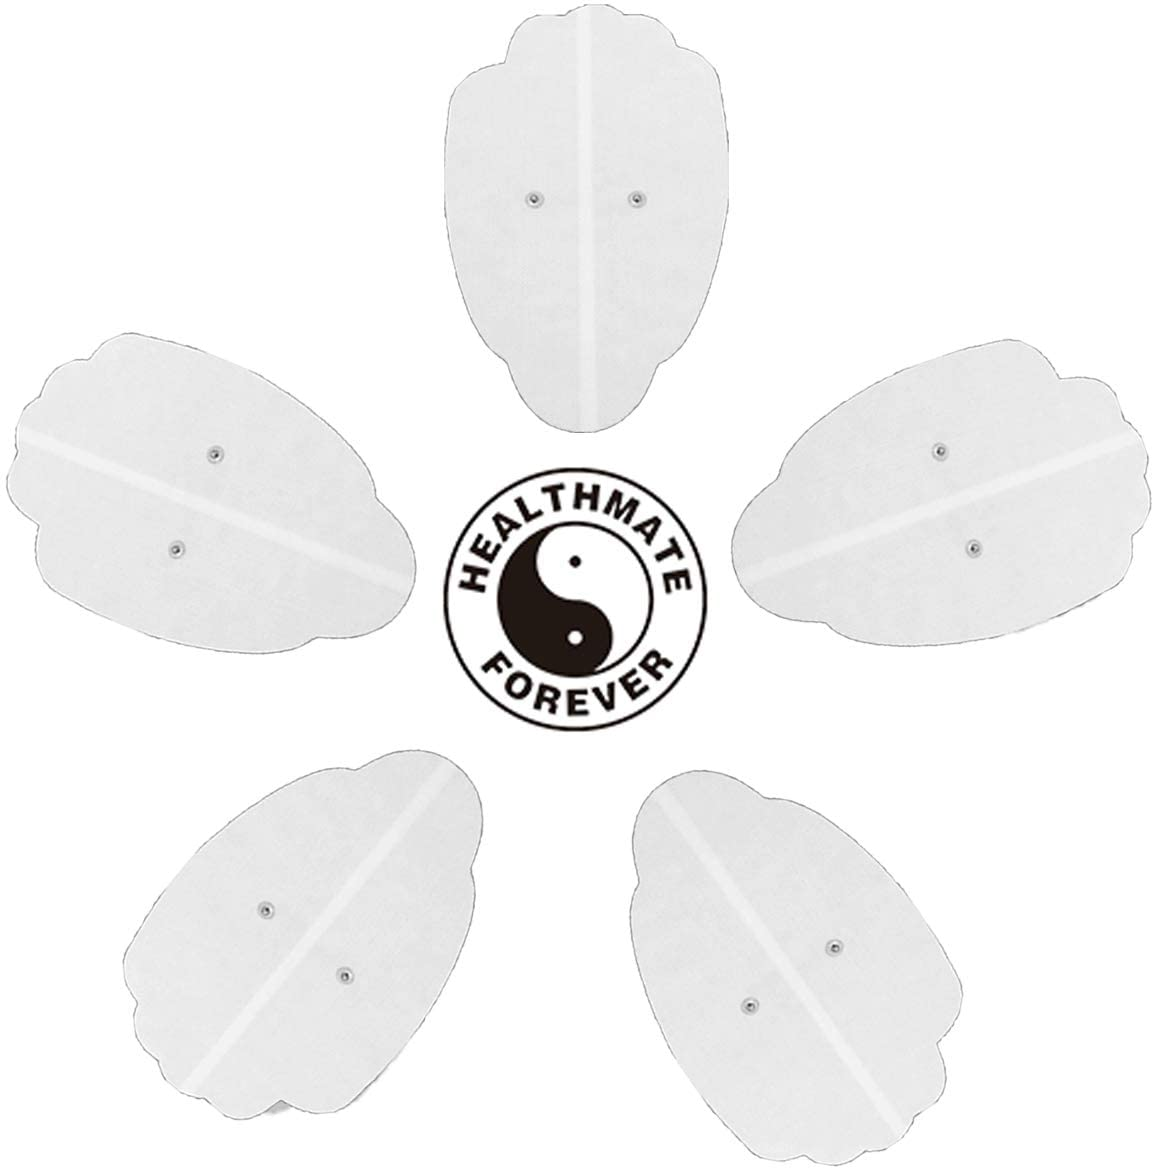 5 Pcs White Snap-on XXL Hand-Shaped Electrode Patches Pads:  8.75"L x 5.5"W - HealthmateForever.com